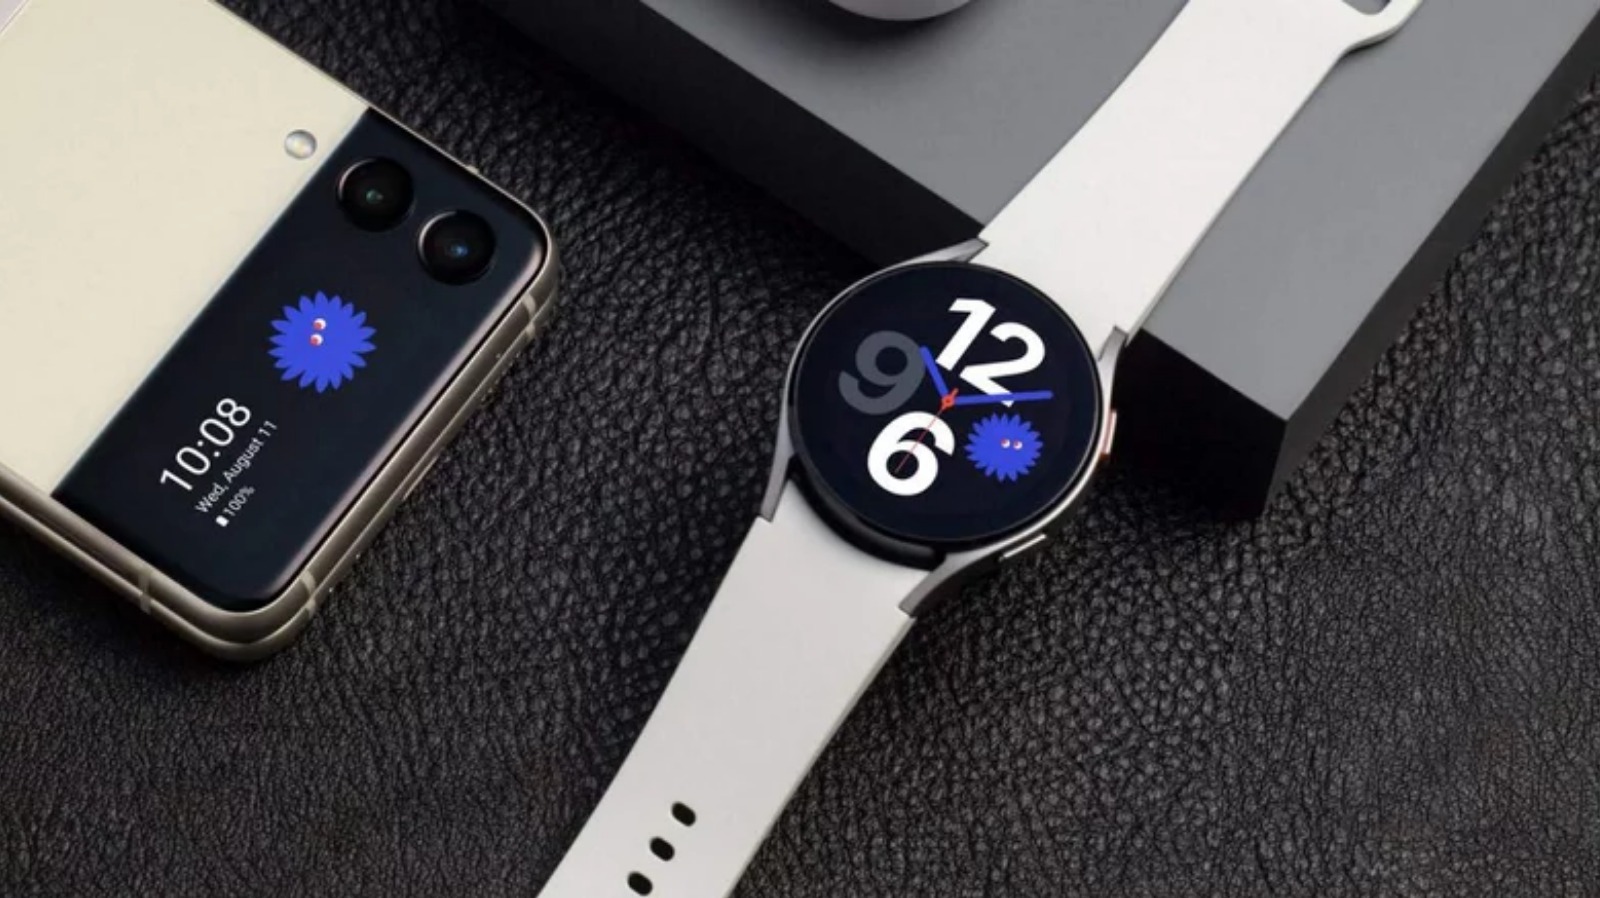 samsung watch with price